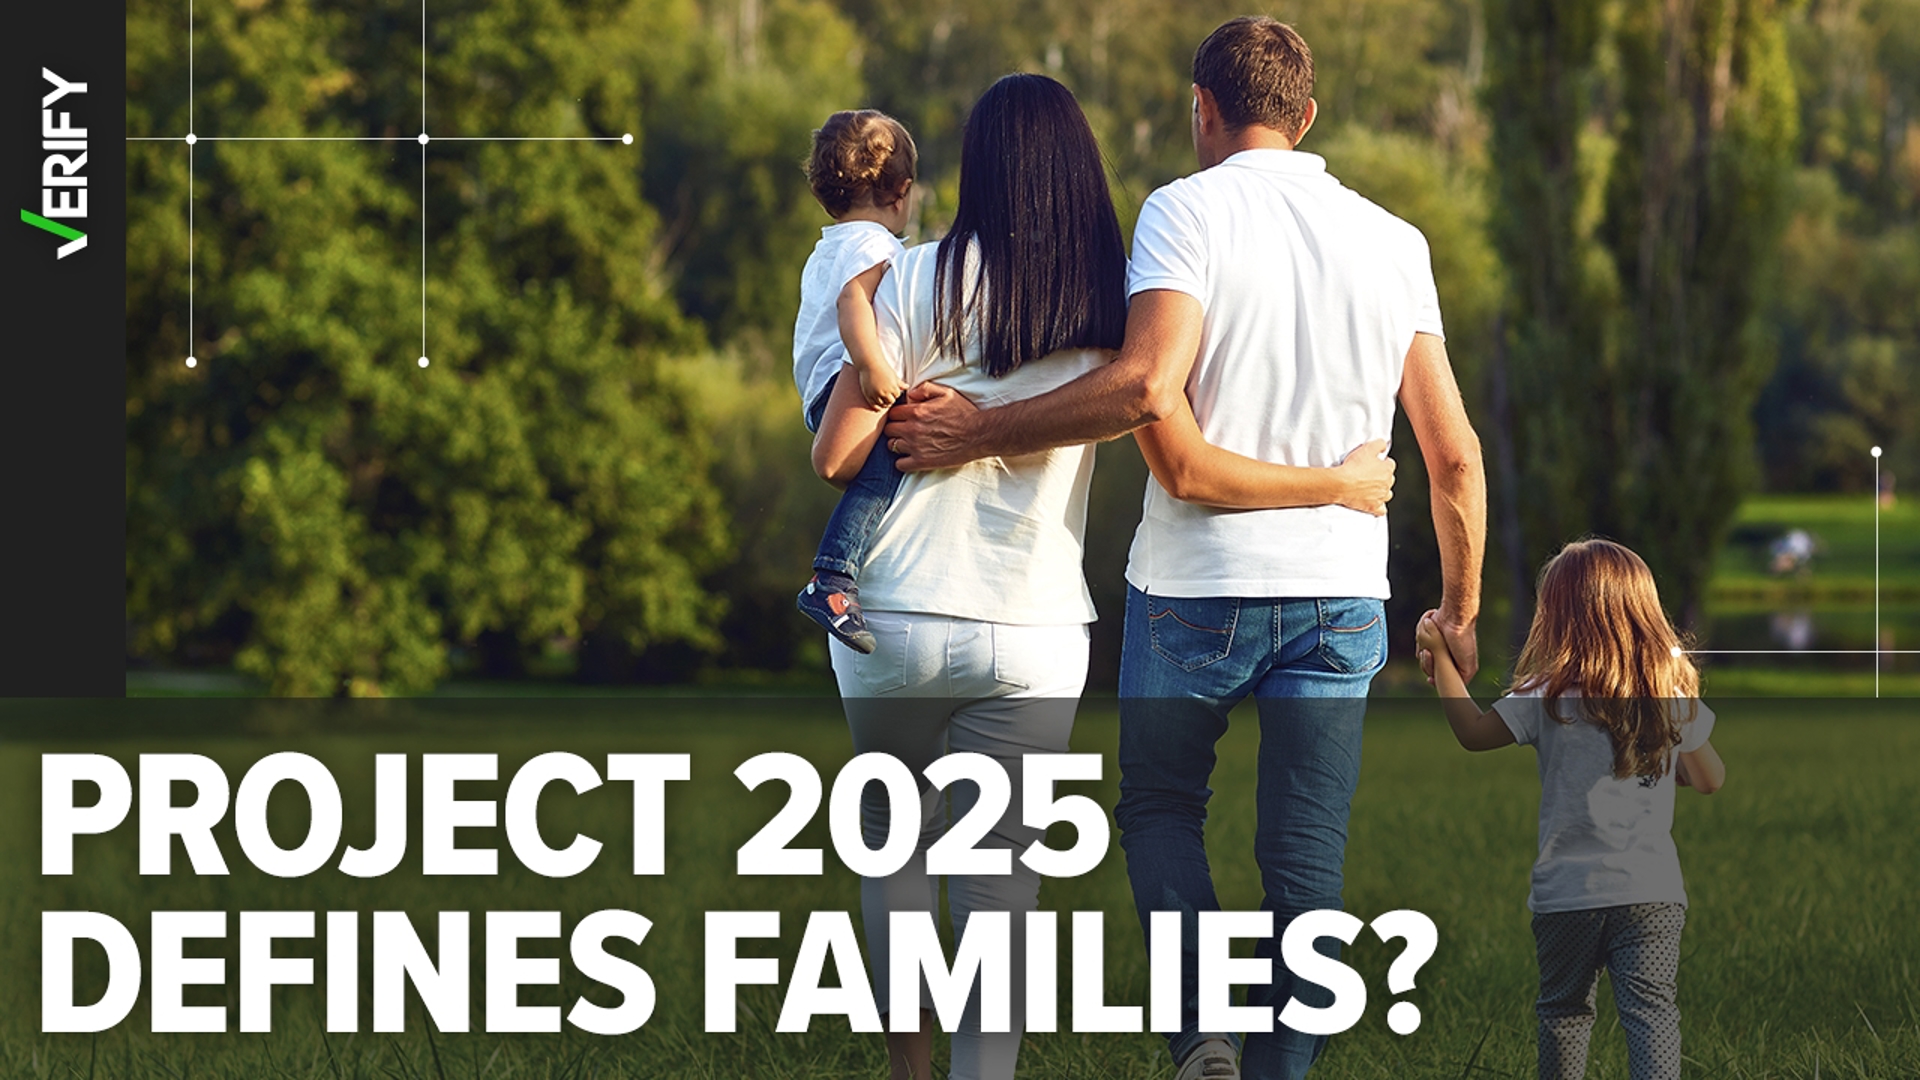 Posts online claim that on page 451, Project 2025 defines a family as a man who works and a woman who stays home.